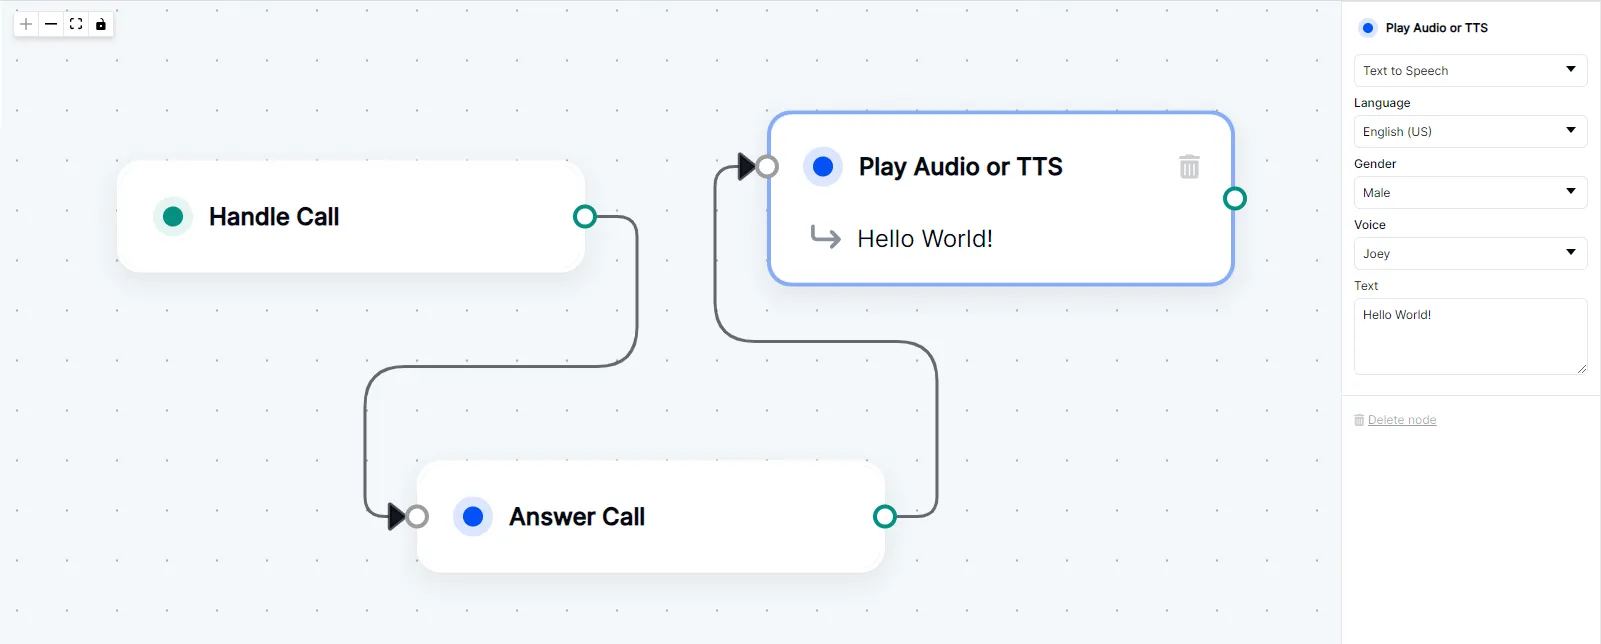 Handle Call Node being used in a Call Flow